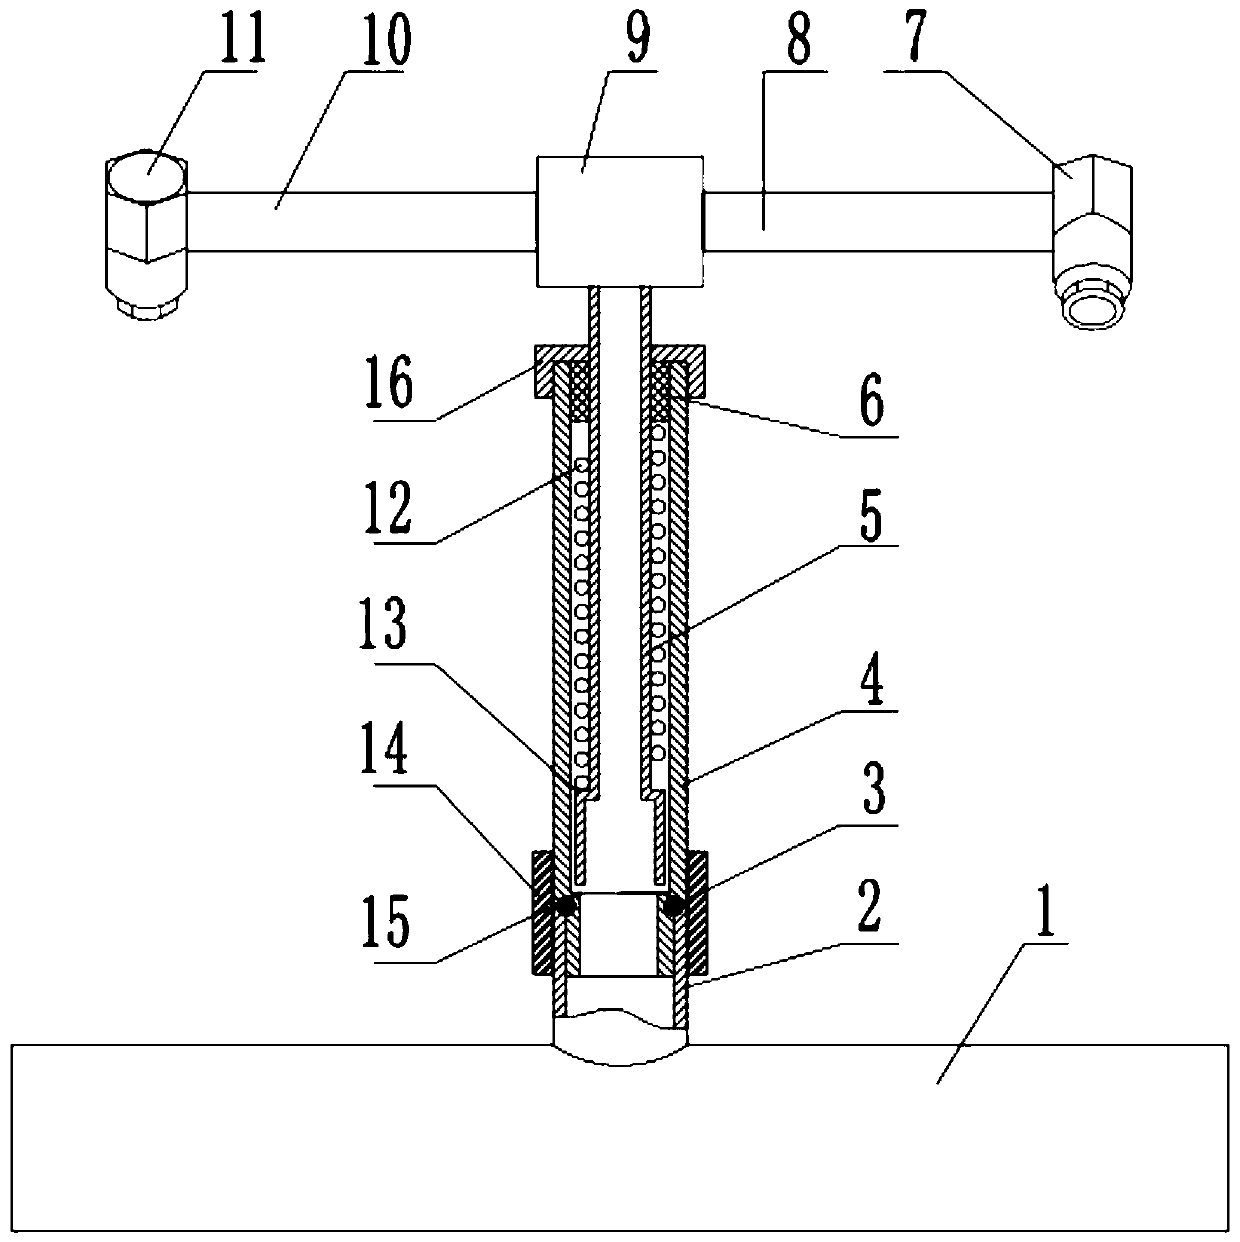 A rotary lifting sprinkler irrigation device for agriculture